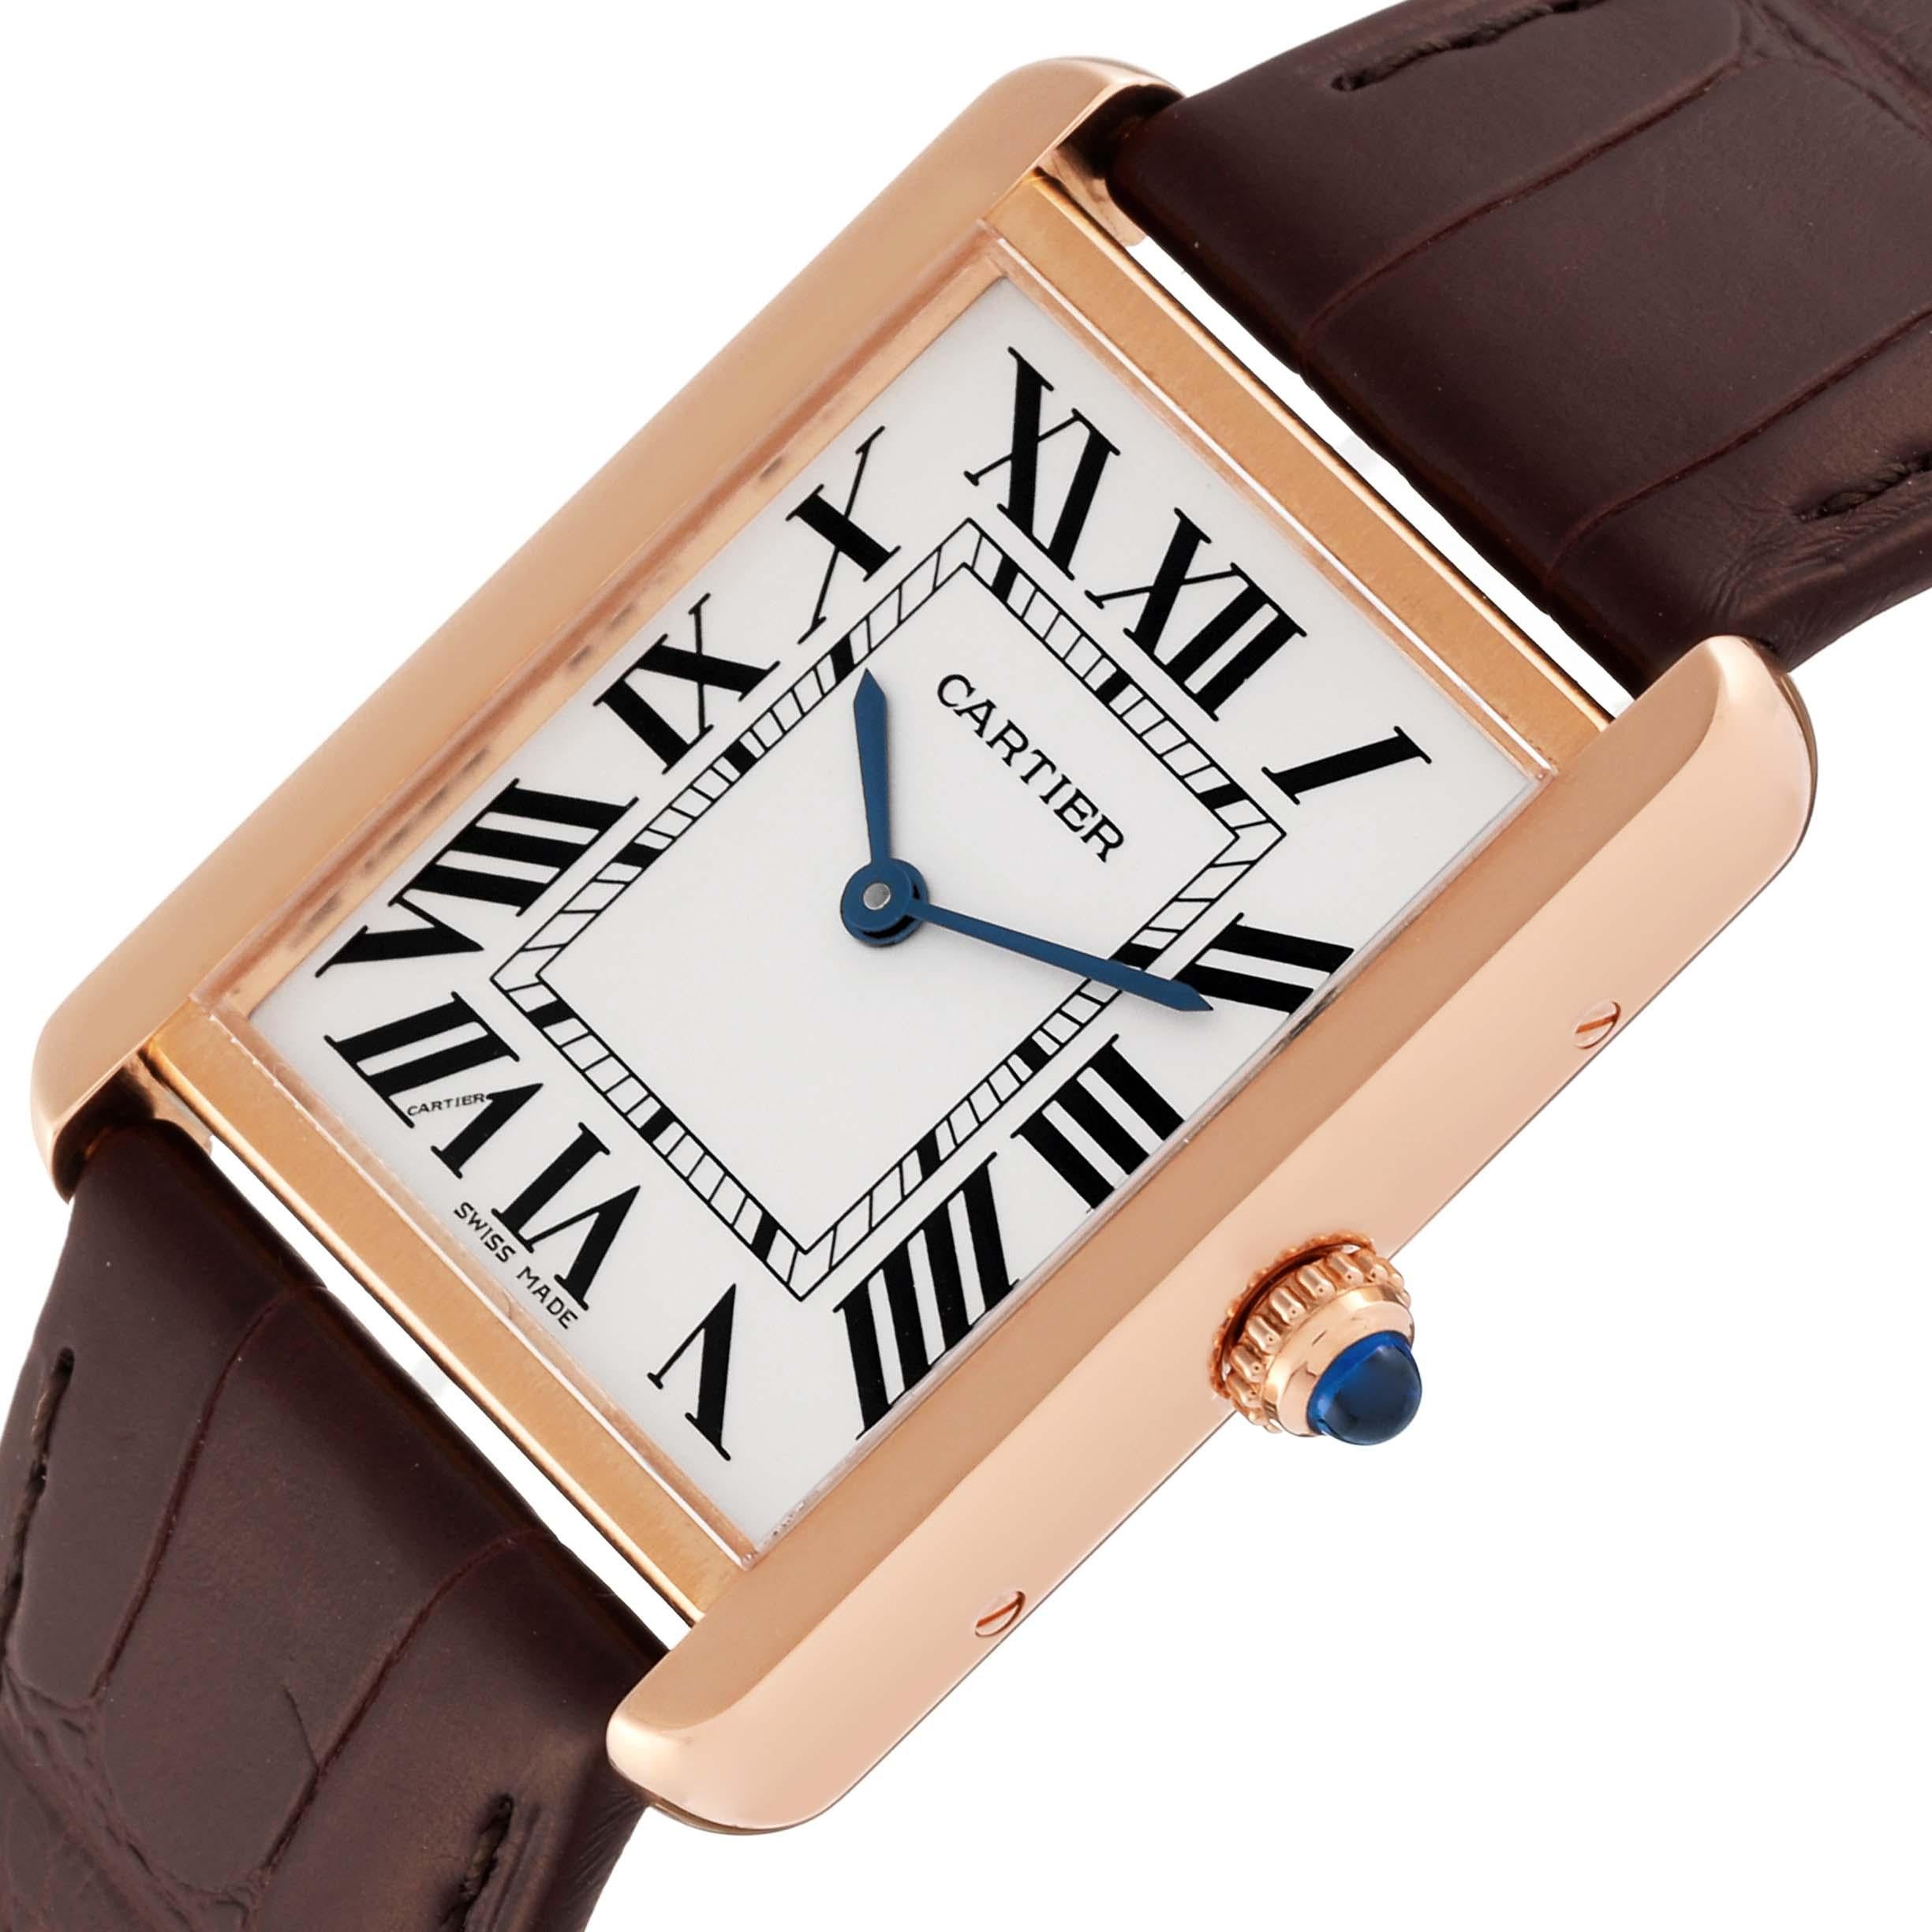 Cartier Tank Solo Large Rose Gold Steel Mens Watch W5200025 Card. Quartz movement. 18k rose gold case 34.0 x 27.0 mm. Stainless steel caseback. Circular grained crown set with a blue spinel cabochon. . Scratch resistant sapphire crystal. Silvered